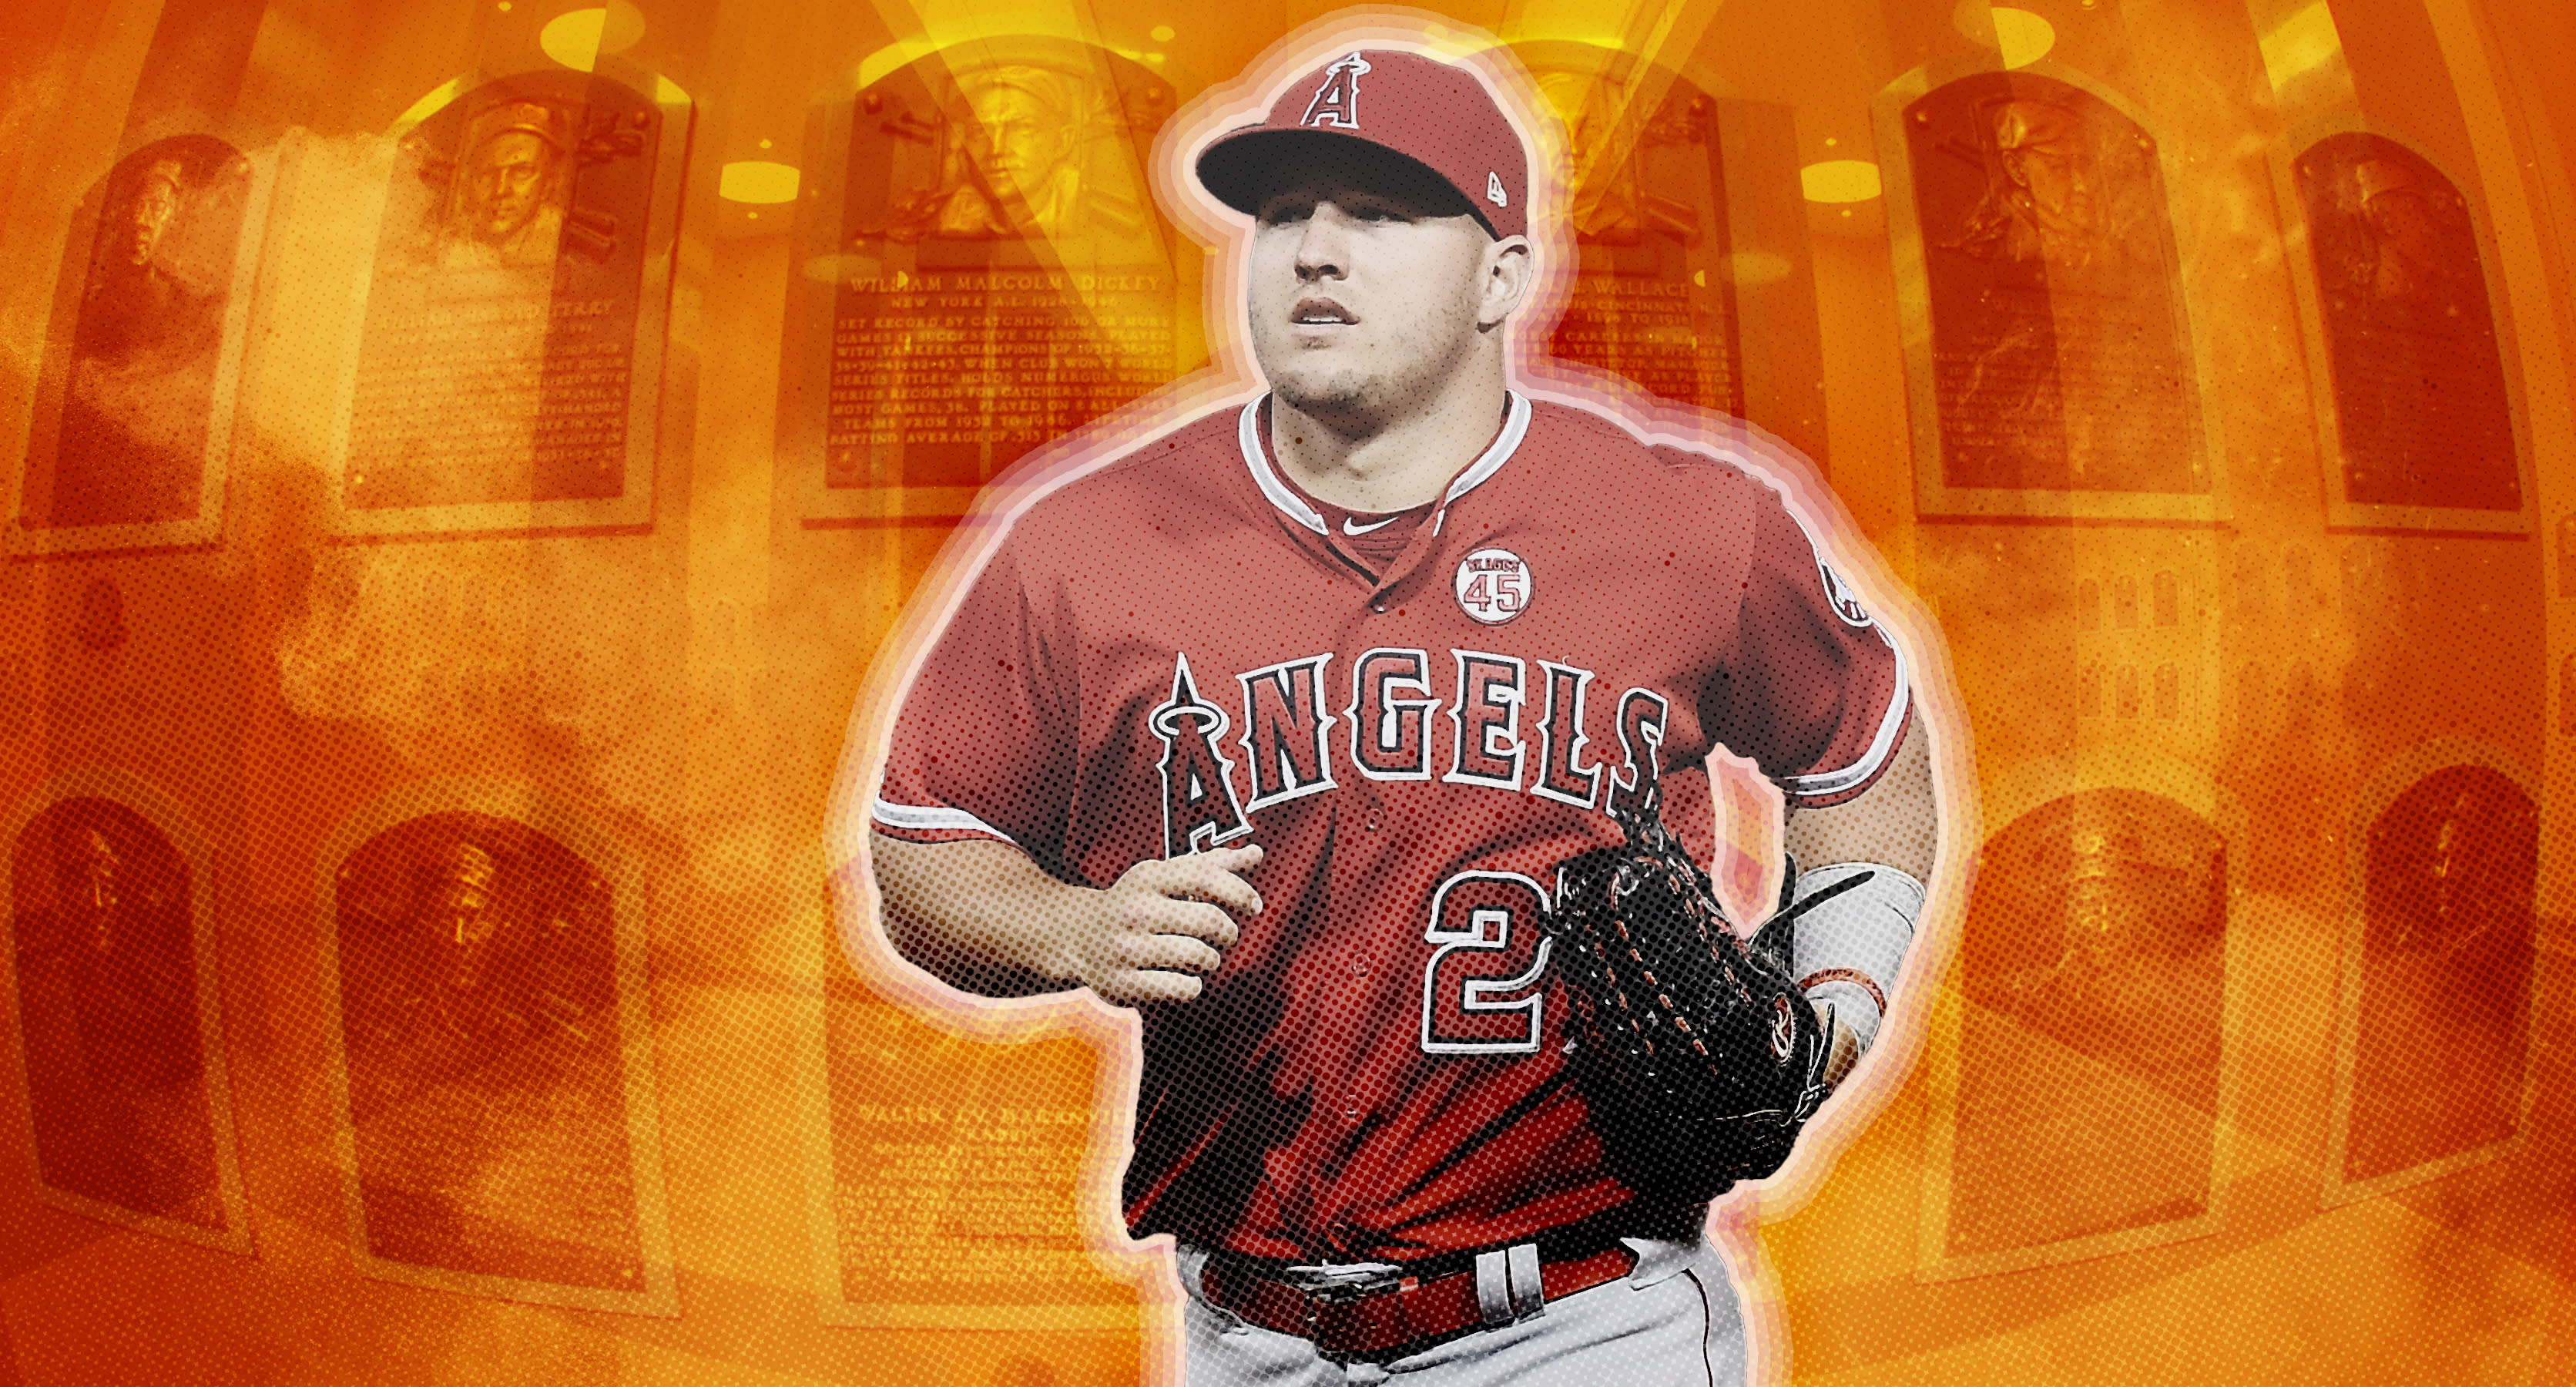 mike trout cooperstown jersey